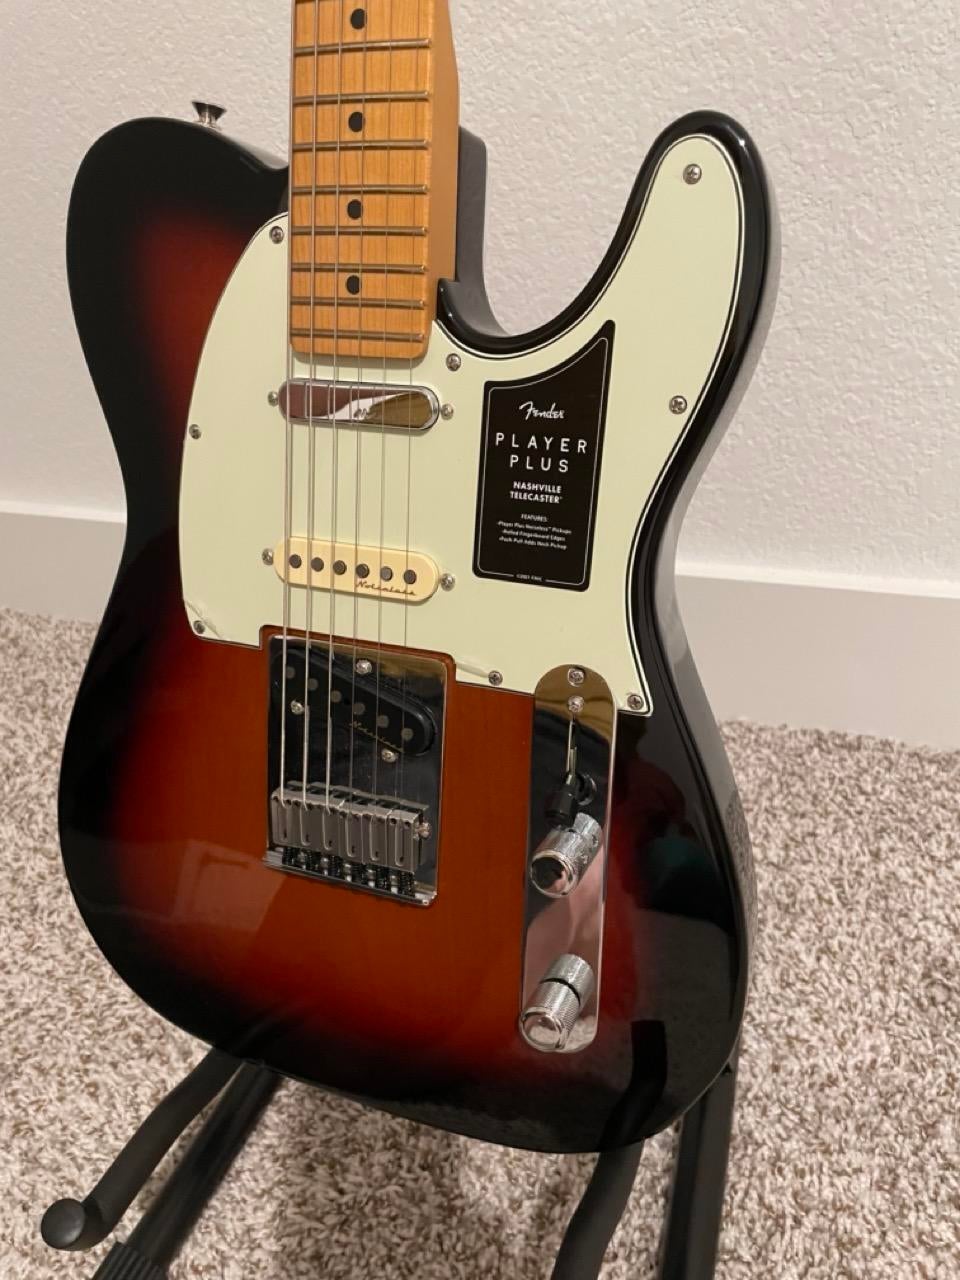 Used Fender Player Plus Nashville Telecaster - Sweetwater's Gear